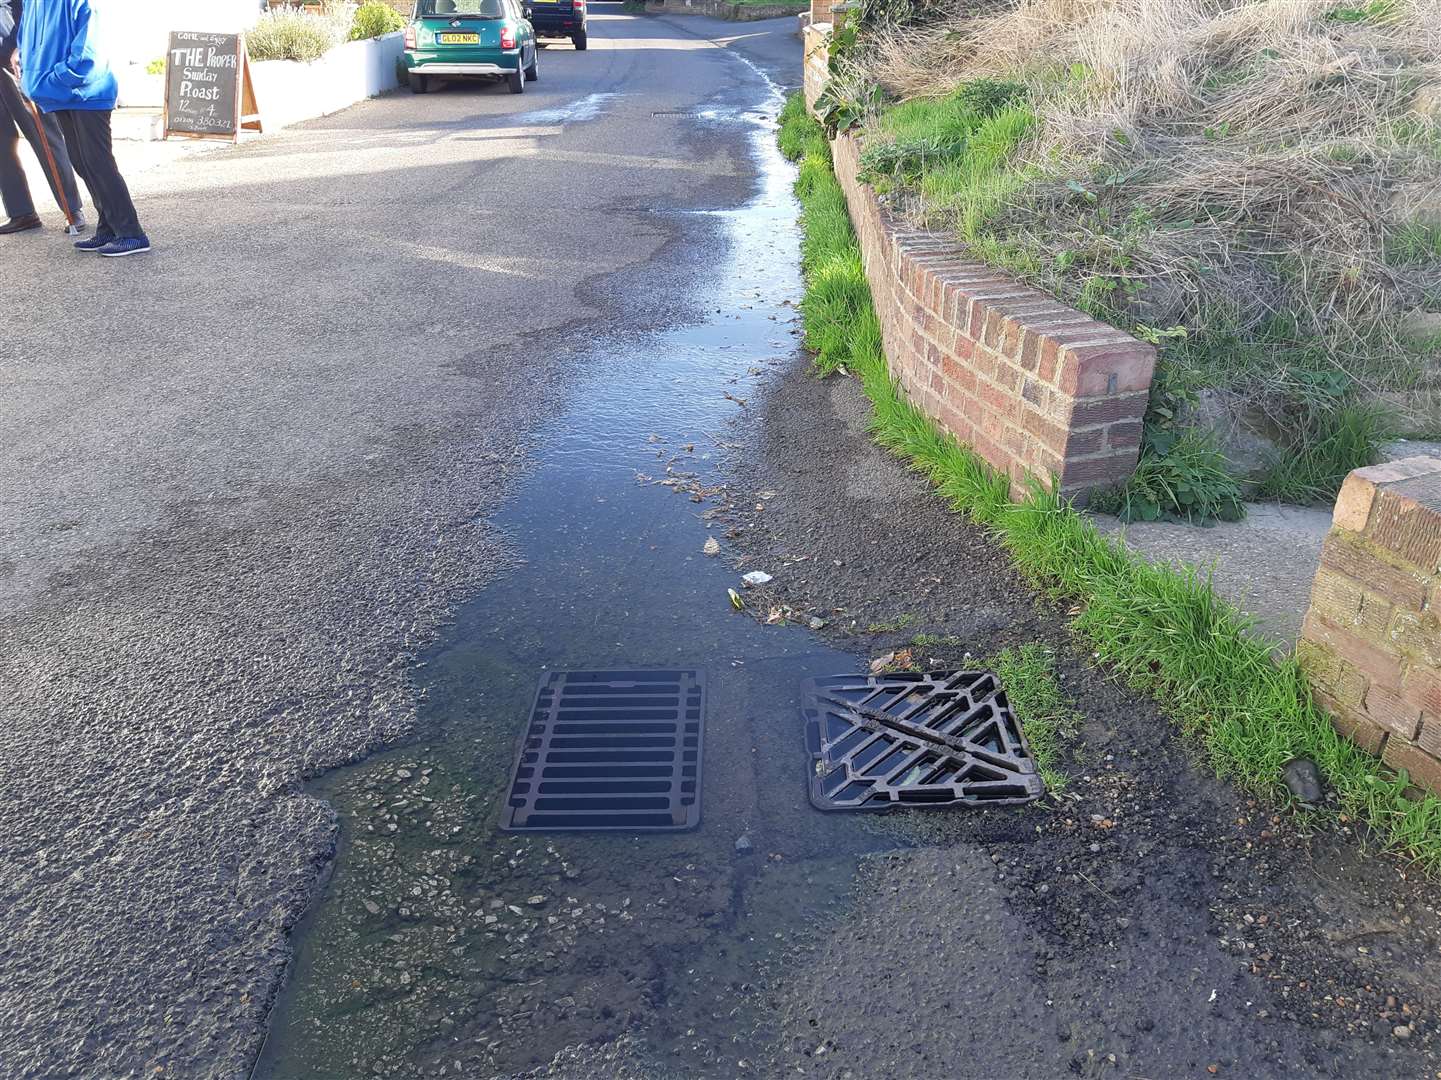 Water draining away on a dry day because of the leak. Picture: Sam Lennon KMG